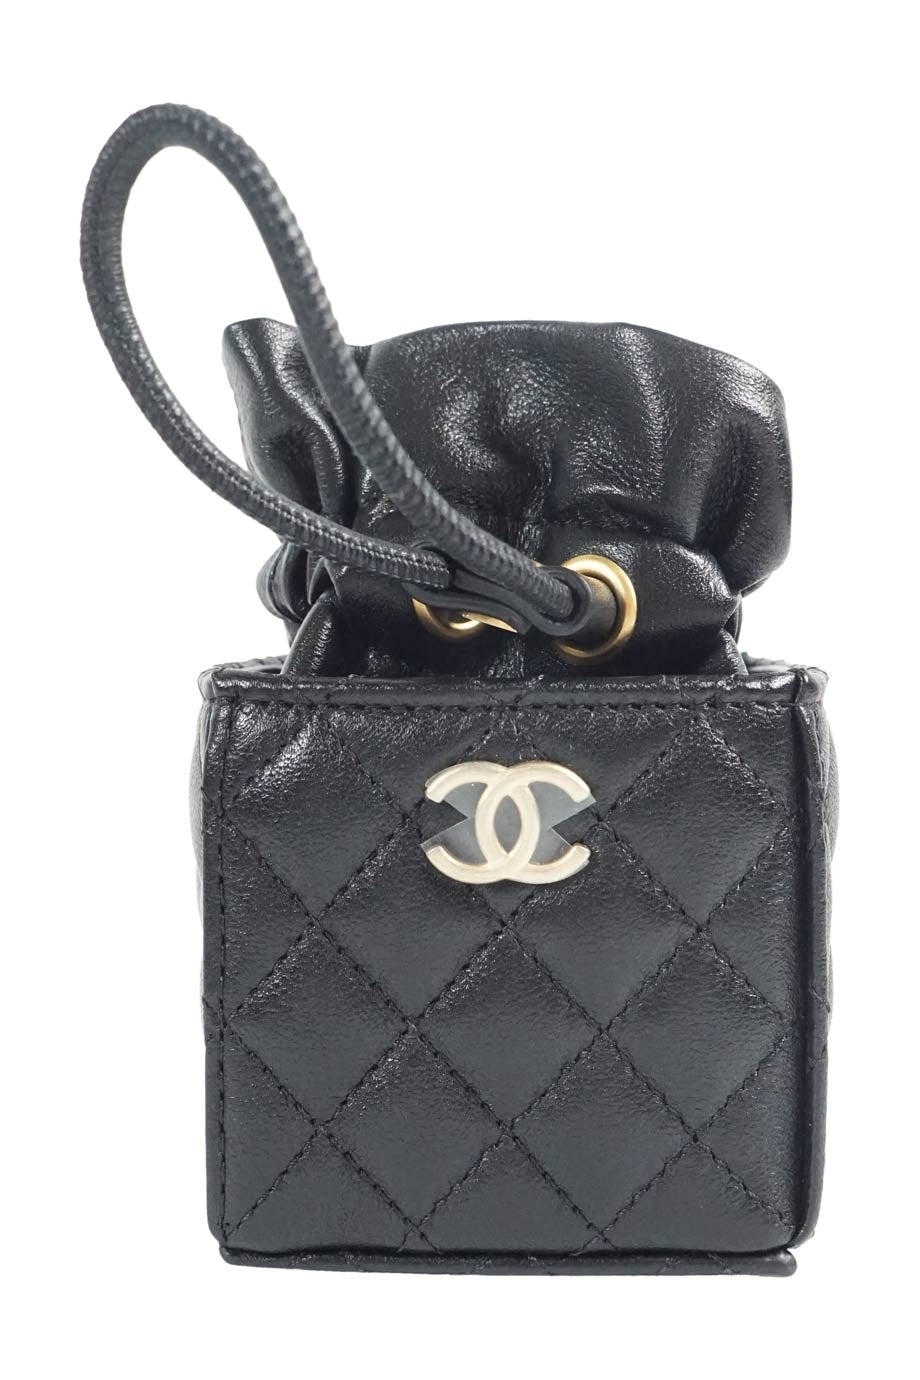 CHANEL Black Lambskin quilted mini box bag with drawstring